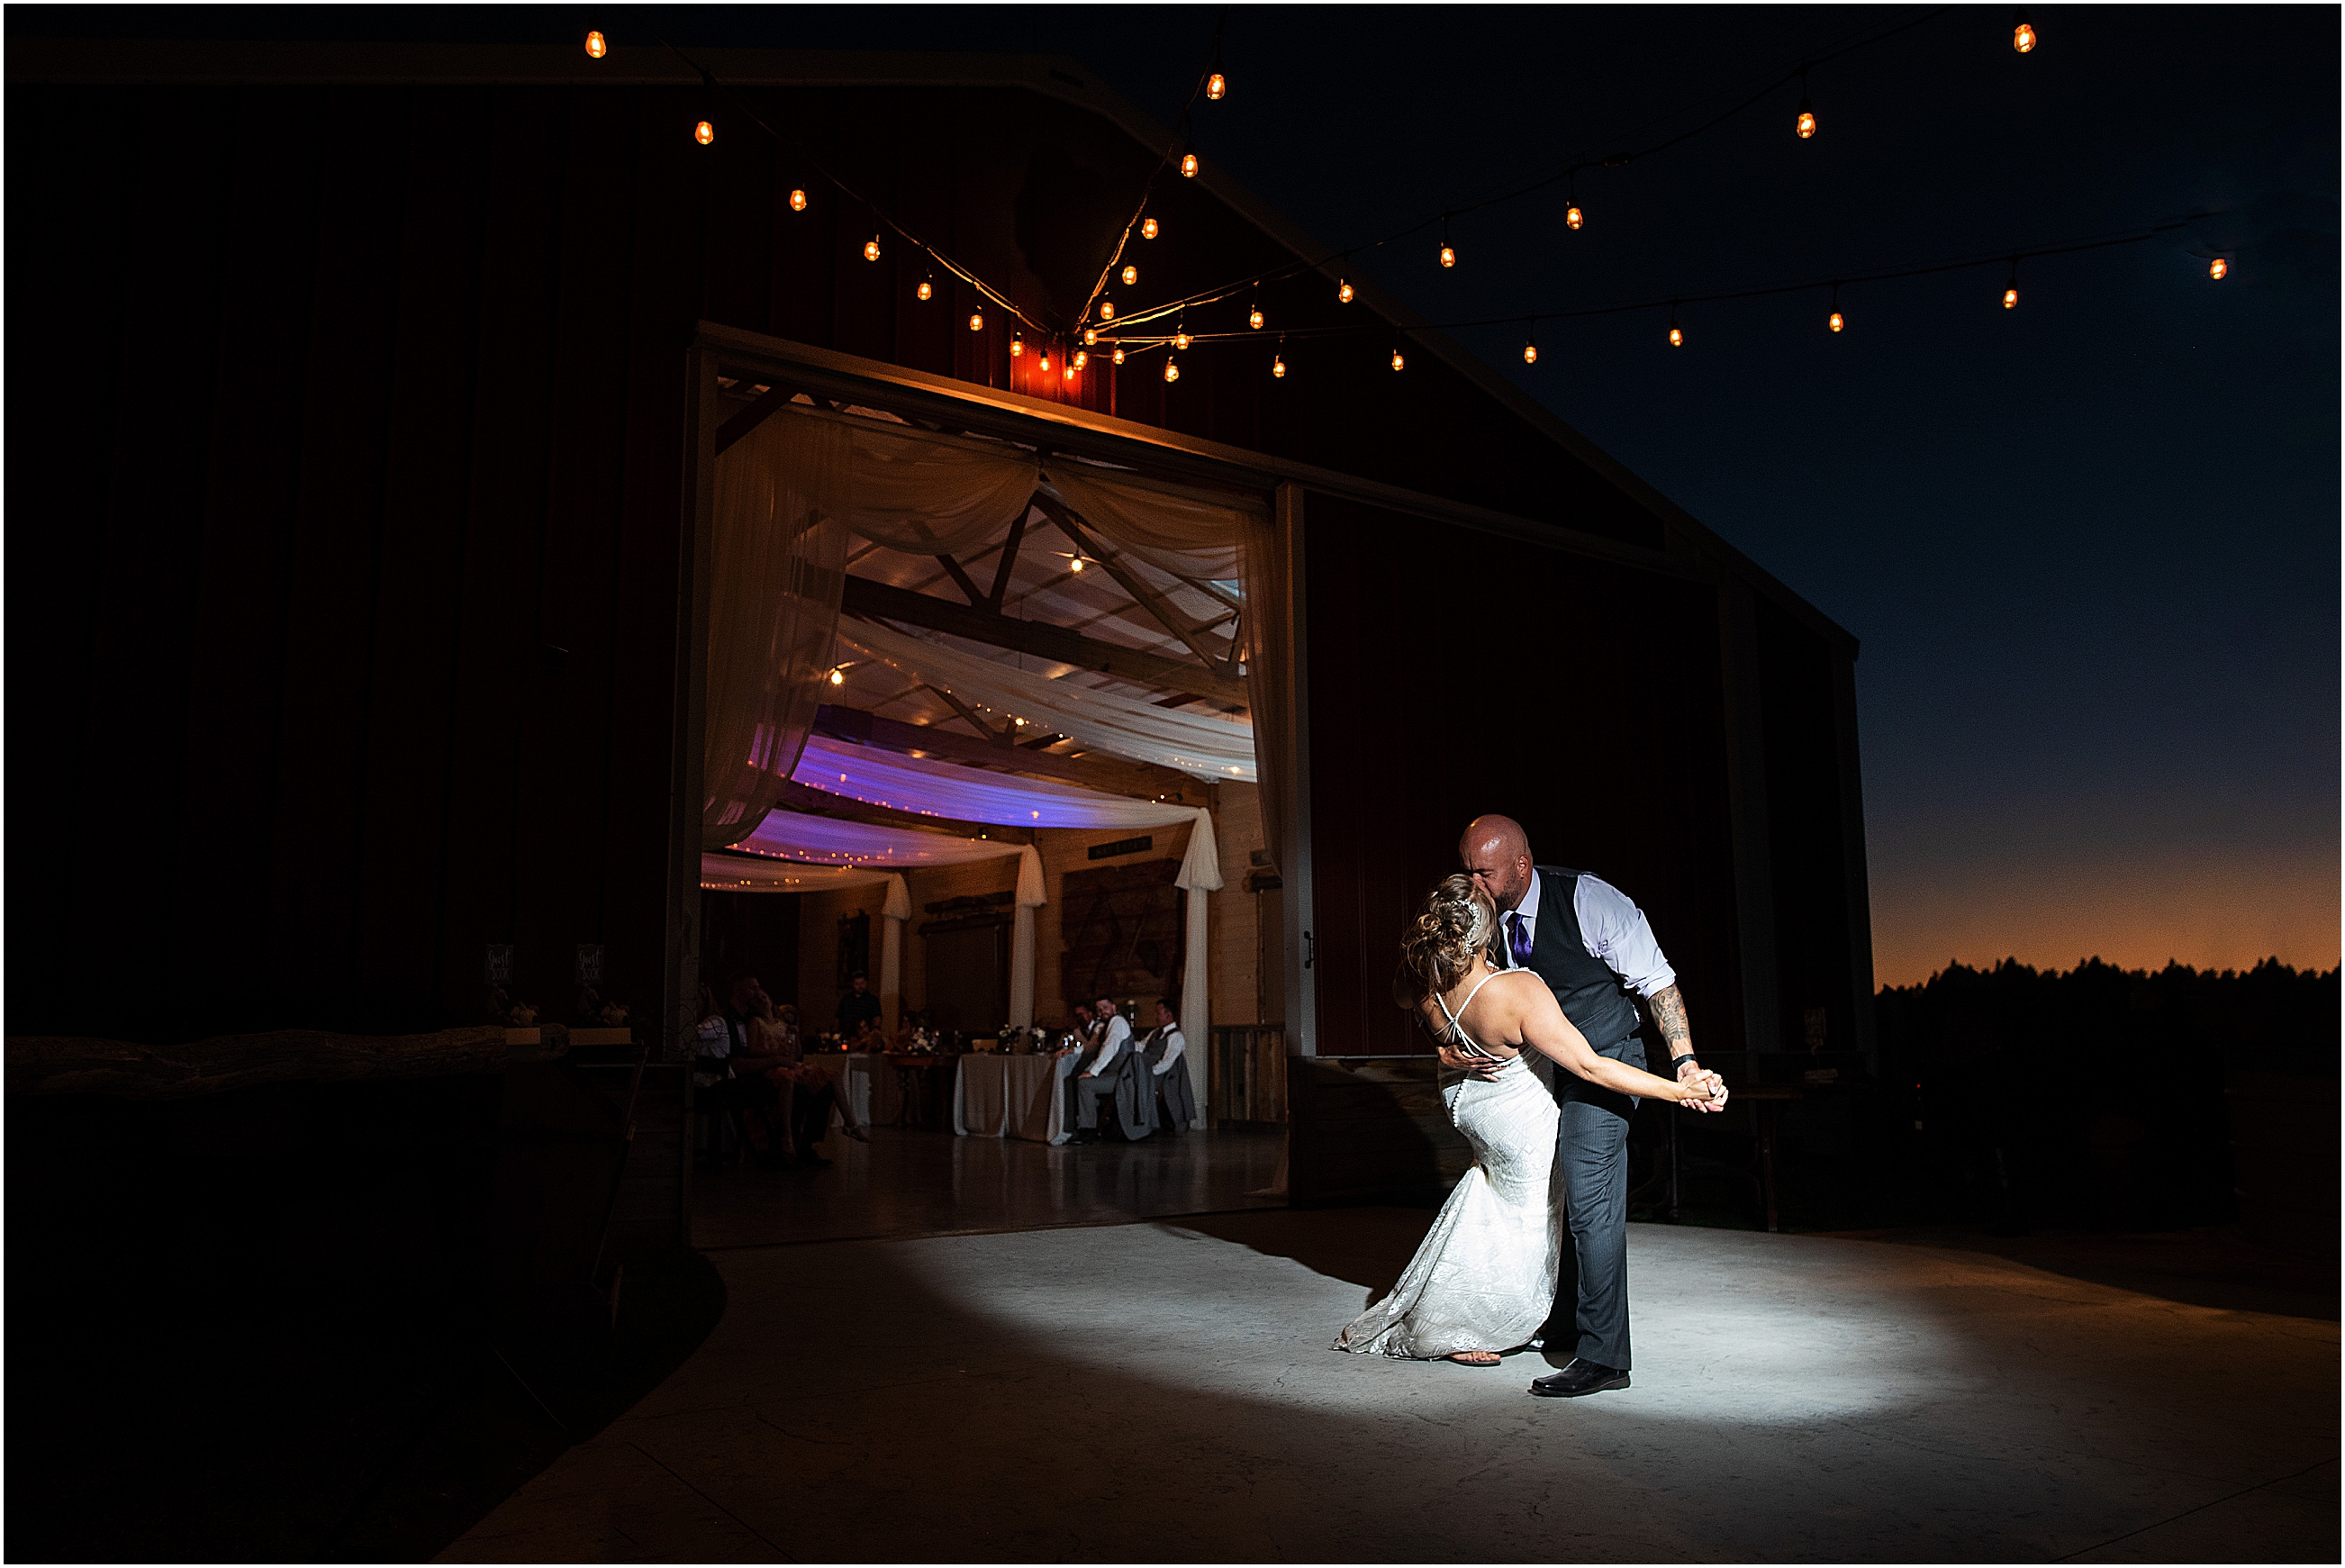 Dramatic image of bride and grooms first dance captured by Tina Joiner a Wedding Photographer in Colorado, groom dips bride as spotlight shines directly on them and everything else is dark, they are kissing